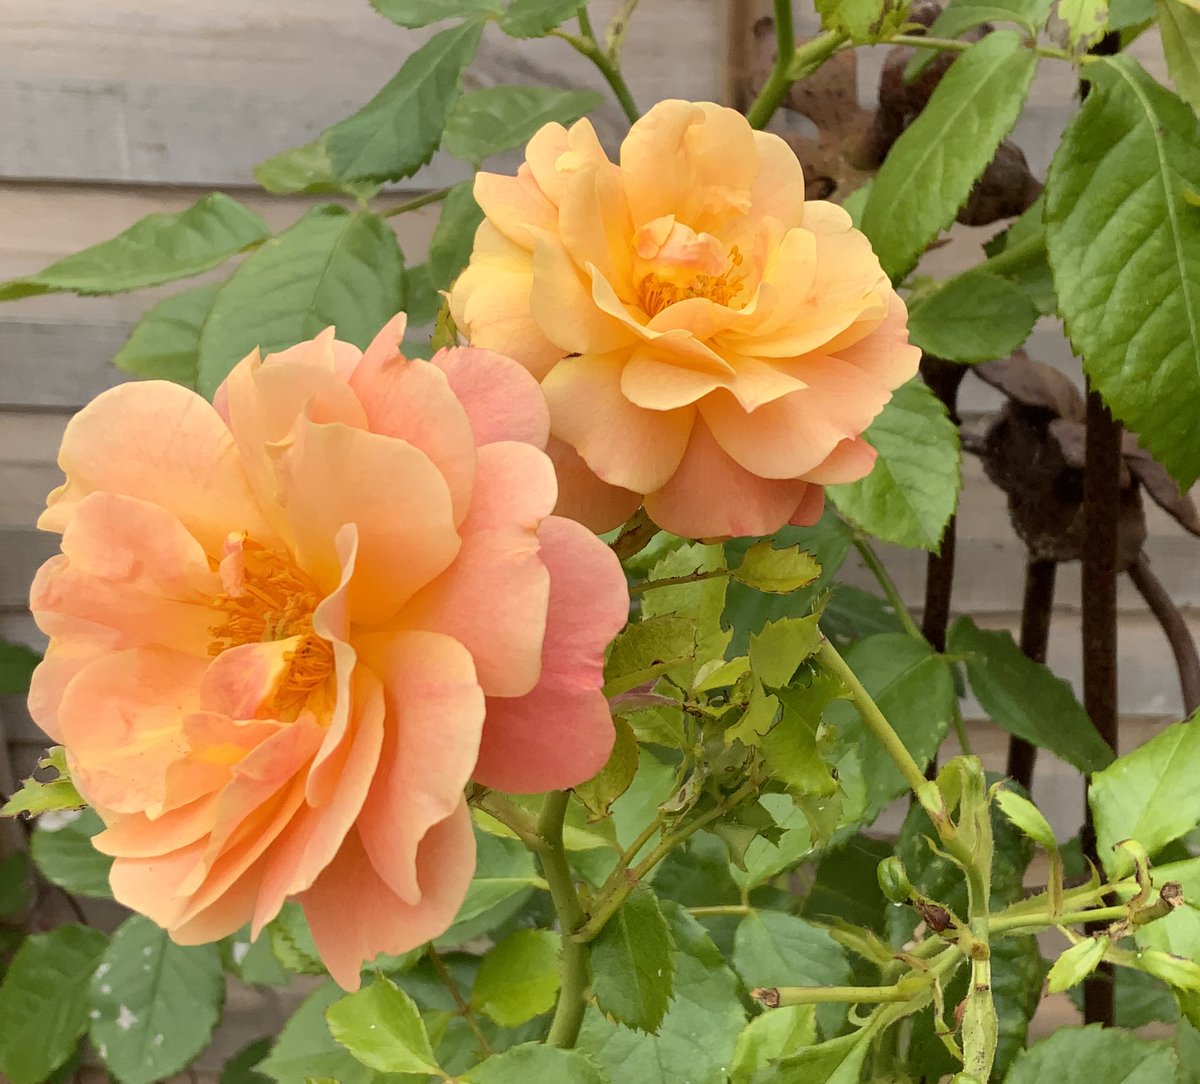 Extreme heat has not been kind to our gardens - foliage scorching and flowers withering - so we’re particularly pleased to see new blooms emerging on ‘Peach Melba’(Rose of the Year 2023) in time for #RoseWednesday 
Have a good day everyone!
#roseoftheyear 
@loujnicholls @kgimson